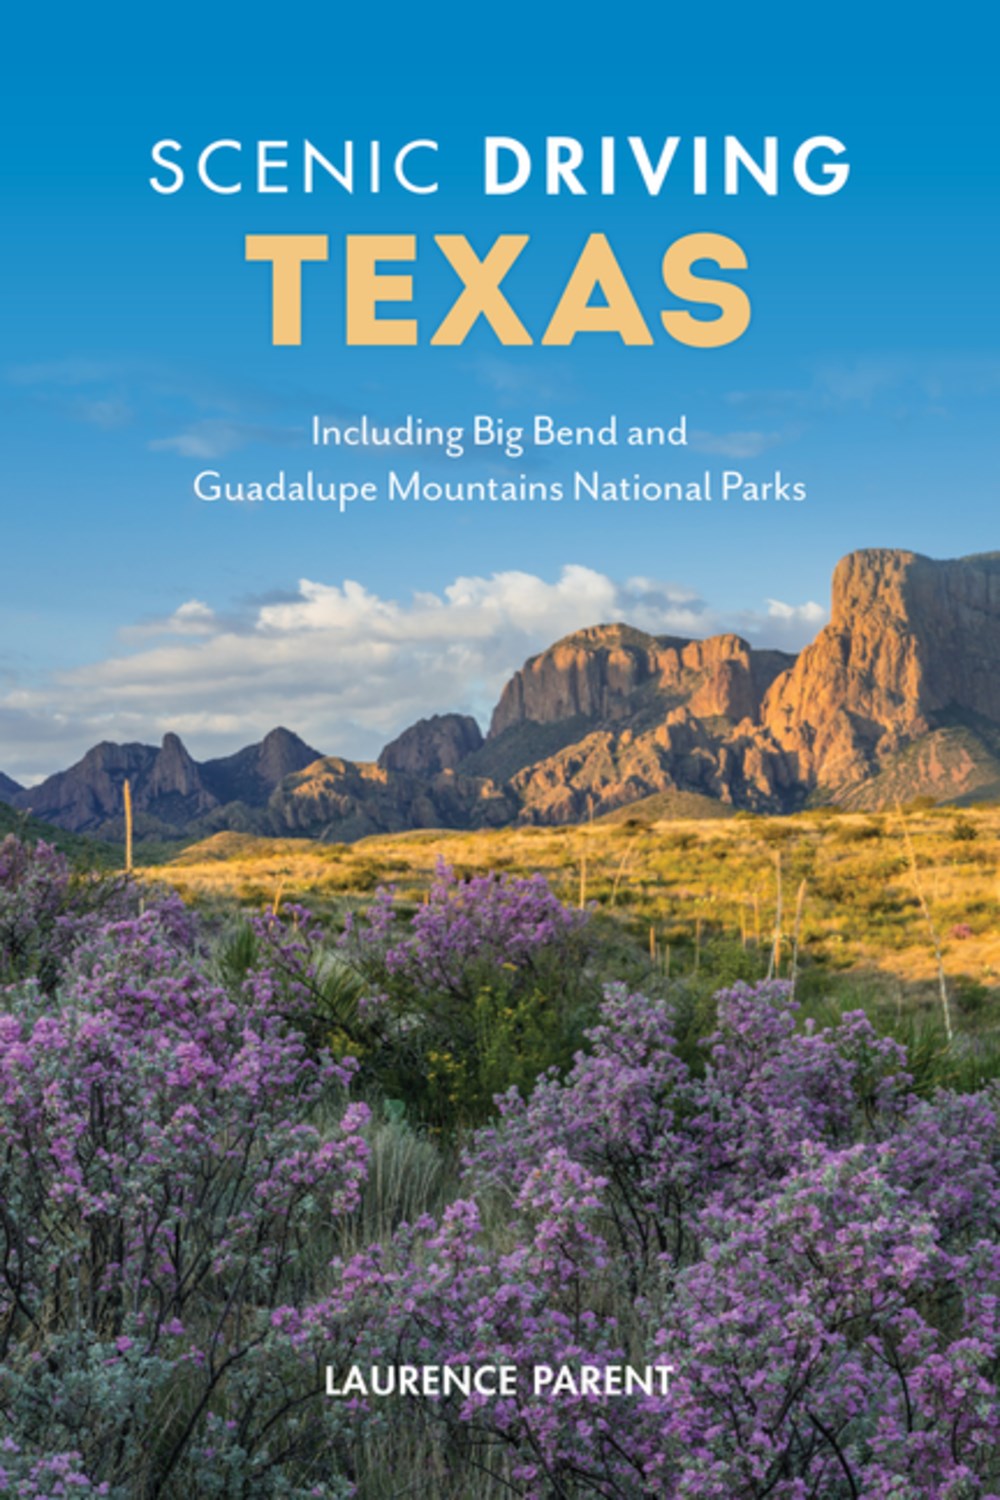 Scenic Driving Texas : Including Big Bend and Guadalupe Mountains National Parks (4th Edition)